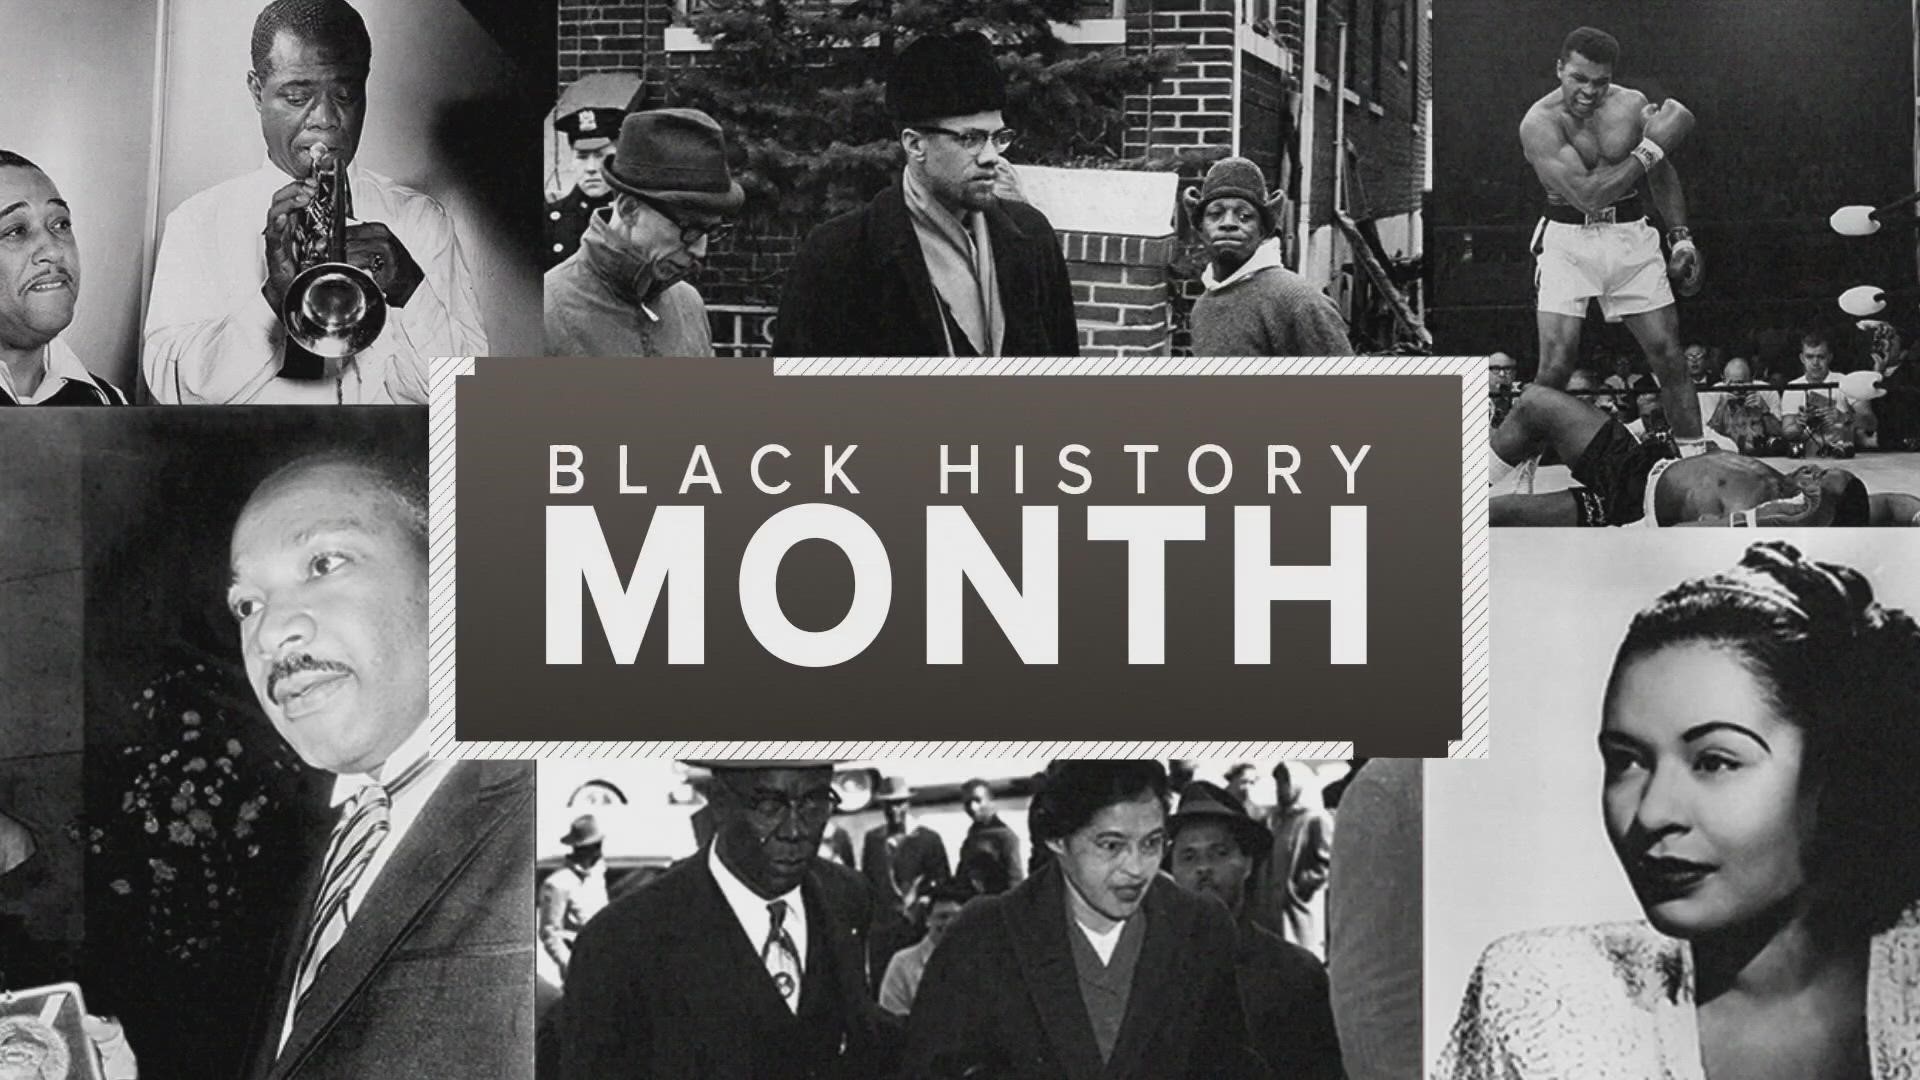 The annual celebration throughout February honors achievements by Black Americans.